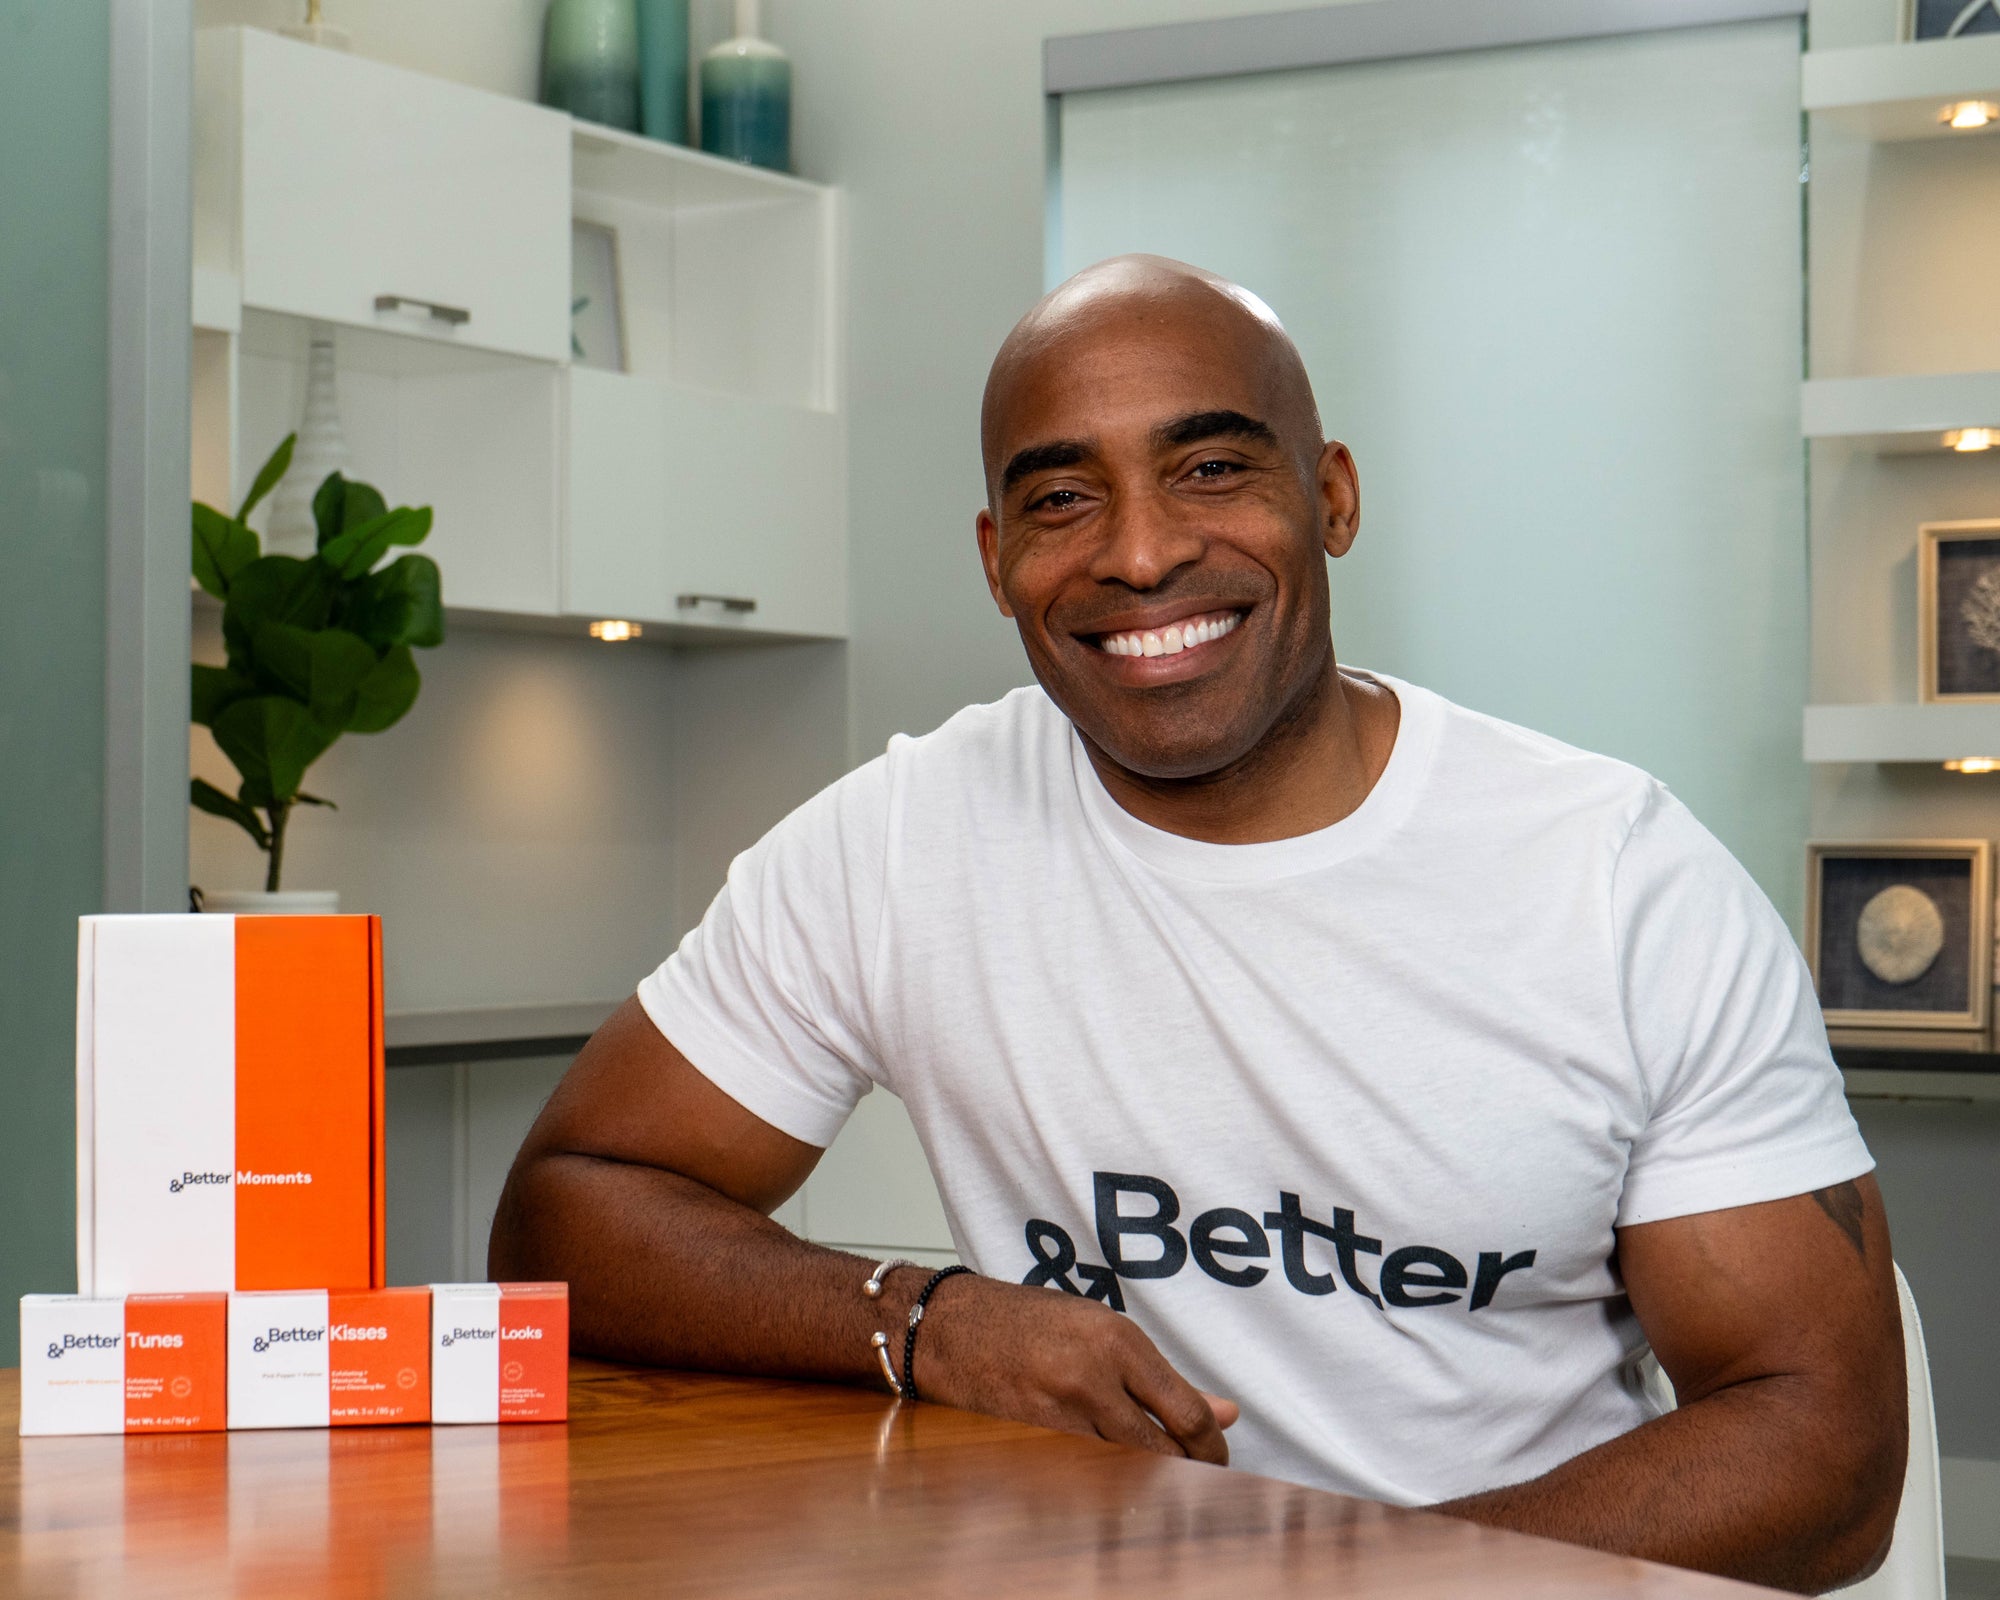 Andbetter with Tiki Barber elevate your personal care routine